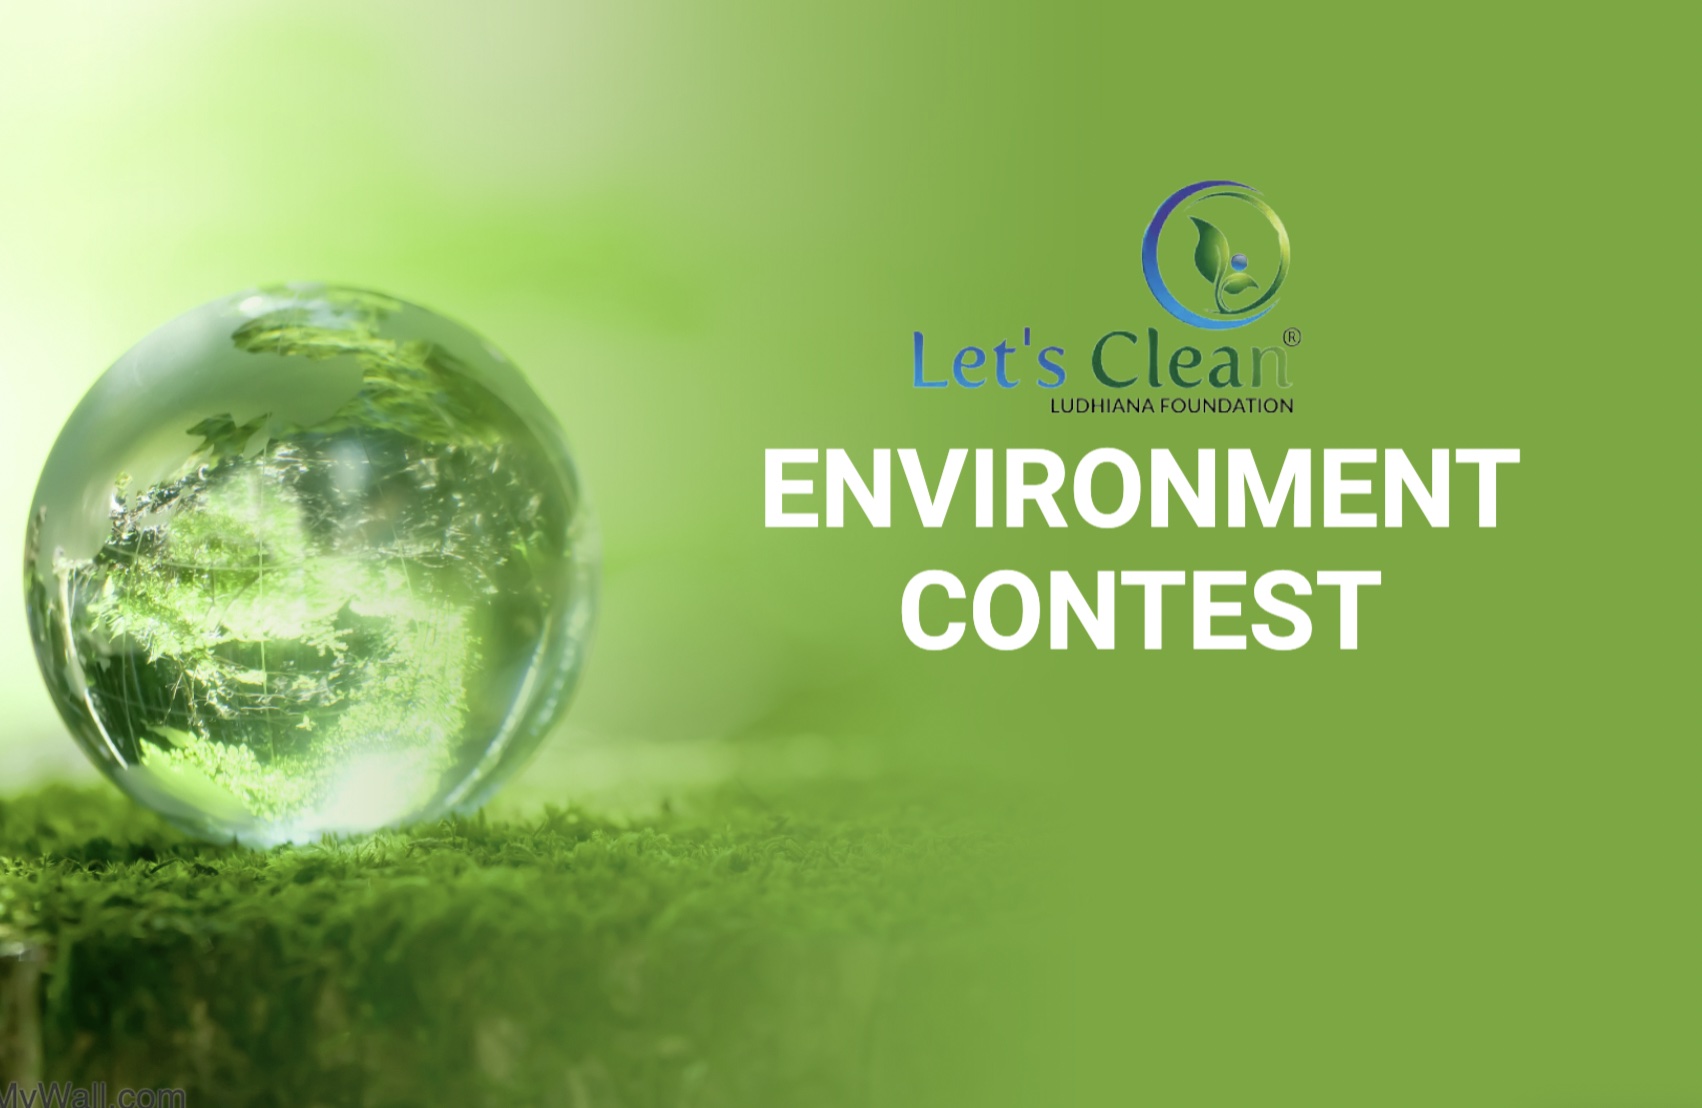 Let’s Clean Ludhiana Foundation Environment Contest  in association with Cityneeds